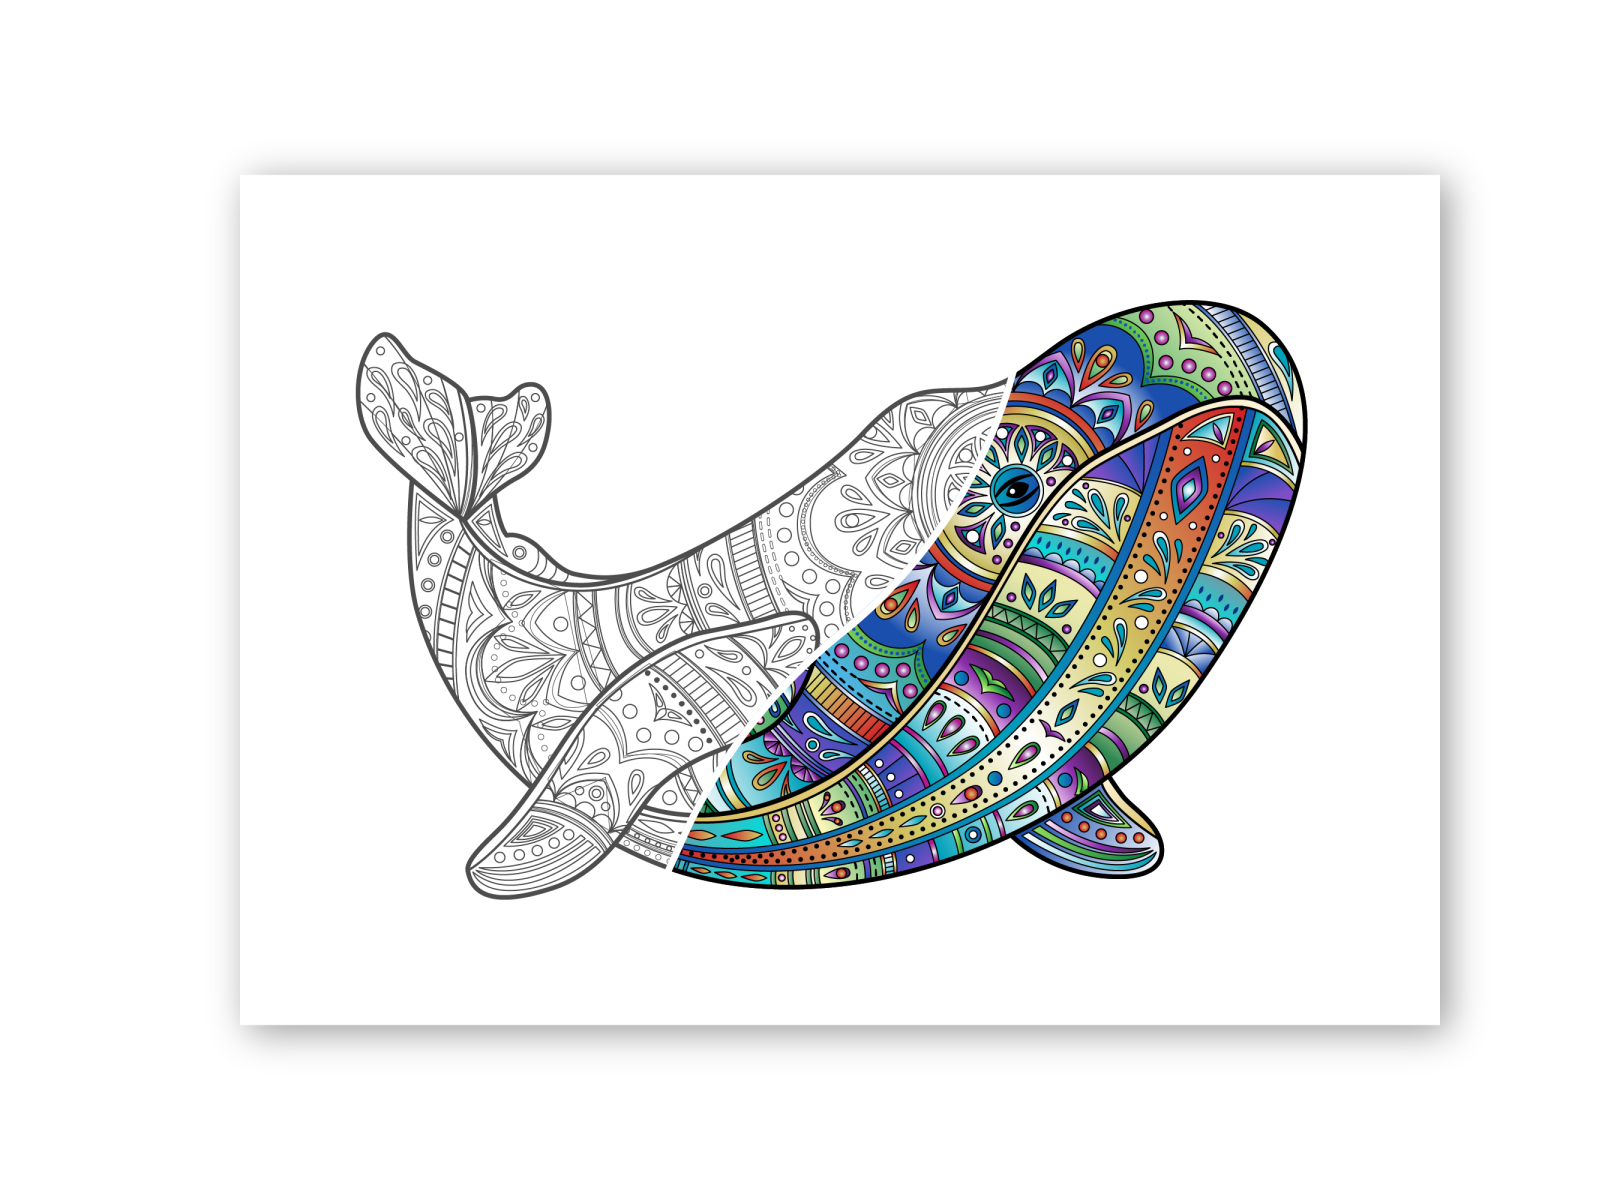 whale coloring page